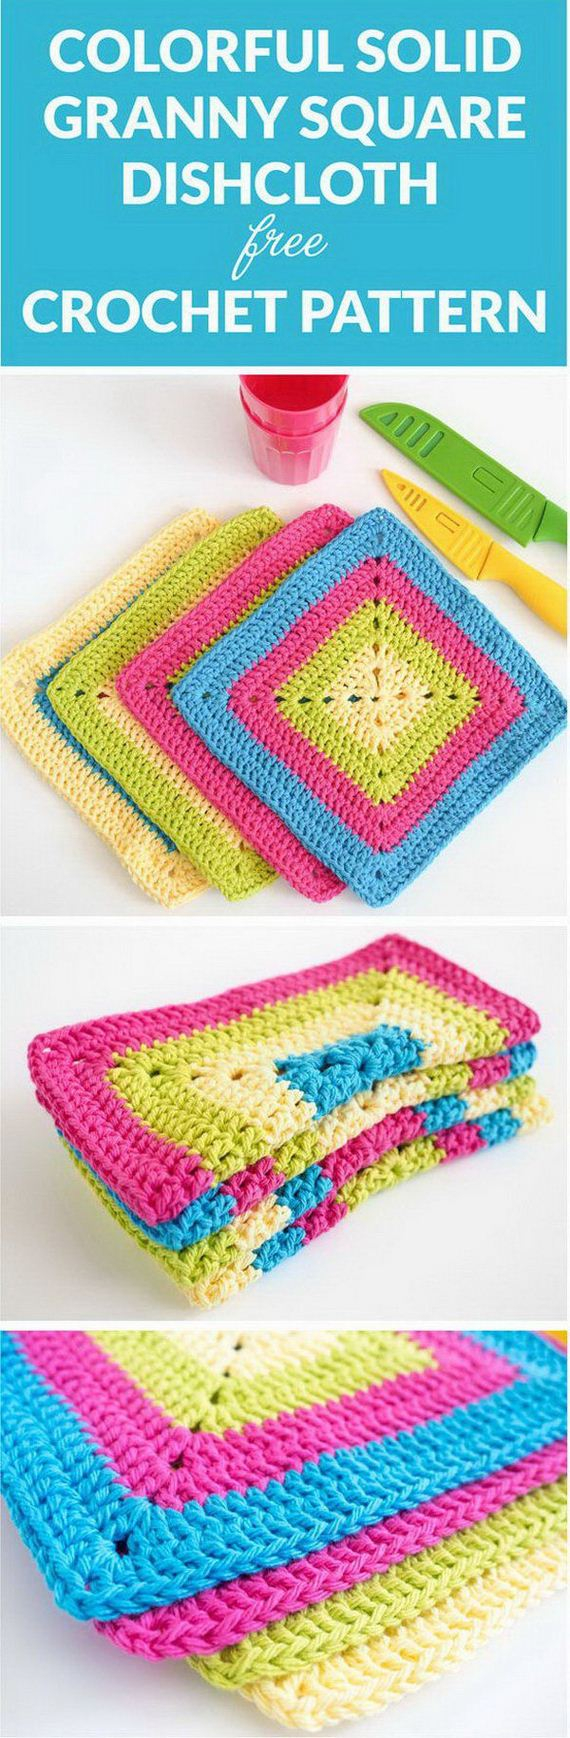 Crochet Spiral Scrubbie Pattern Easy Crochet And Knitted Dishcloth Patterns